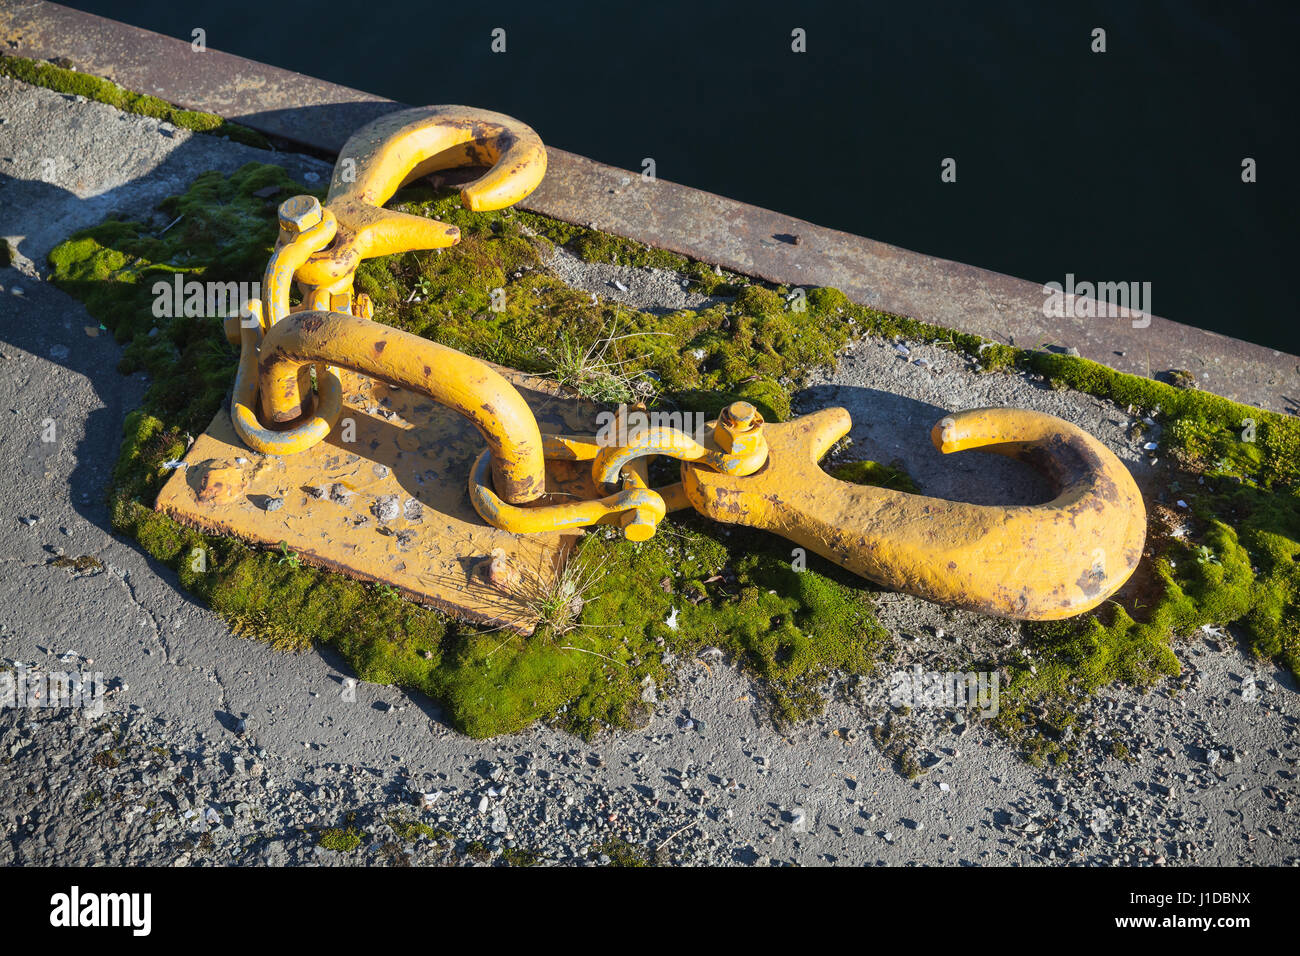 Ships mooring equipment, yellow hooks for ropes mounted in concrete pier Stock Photo